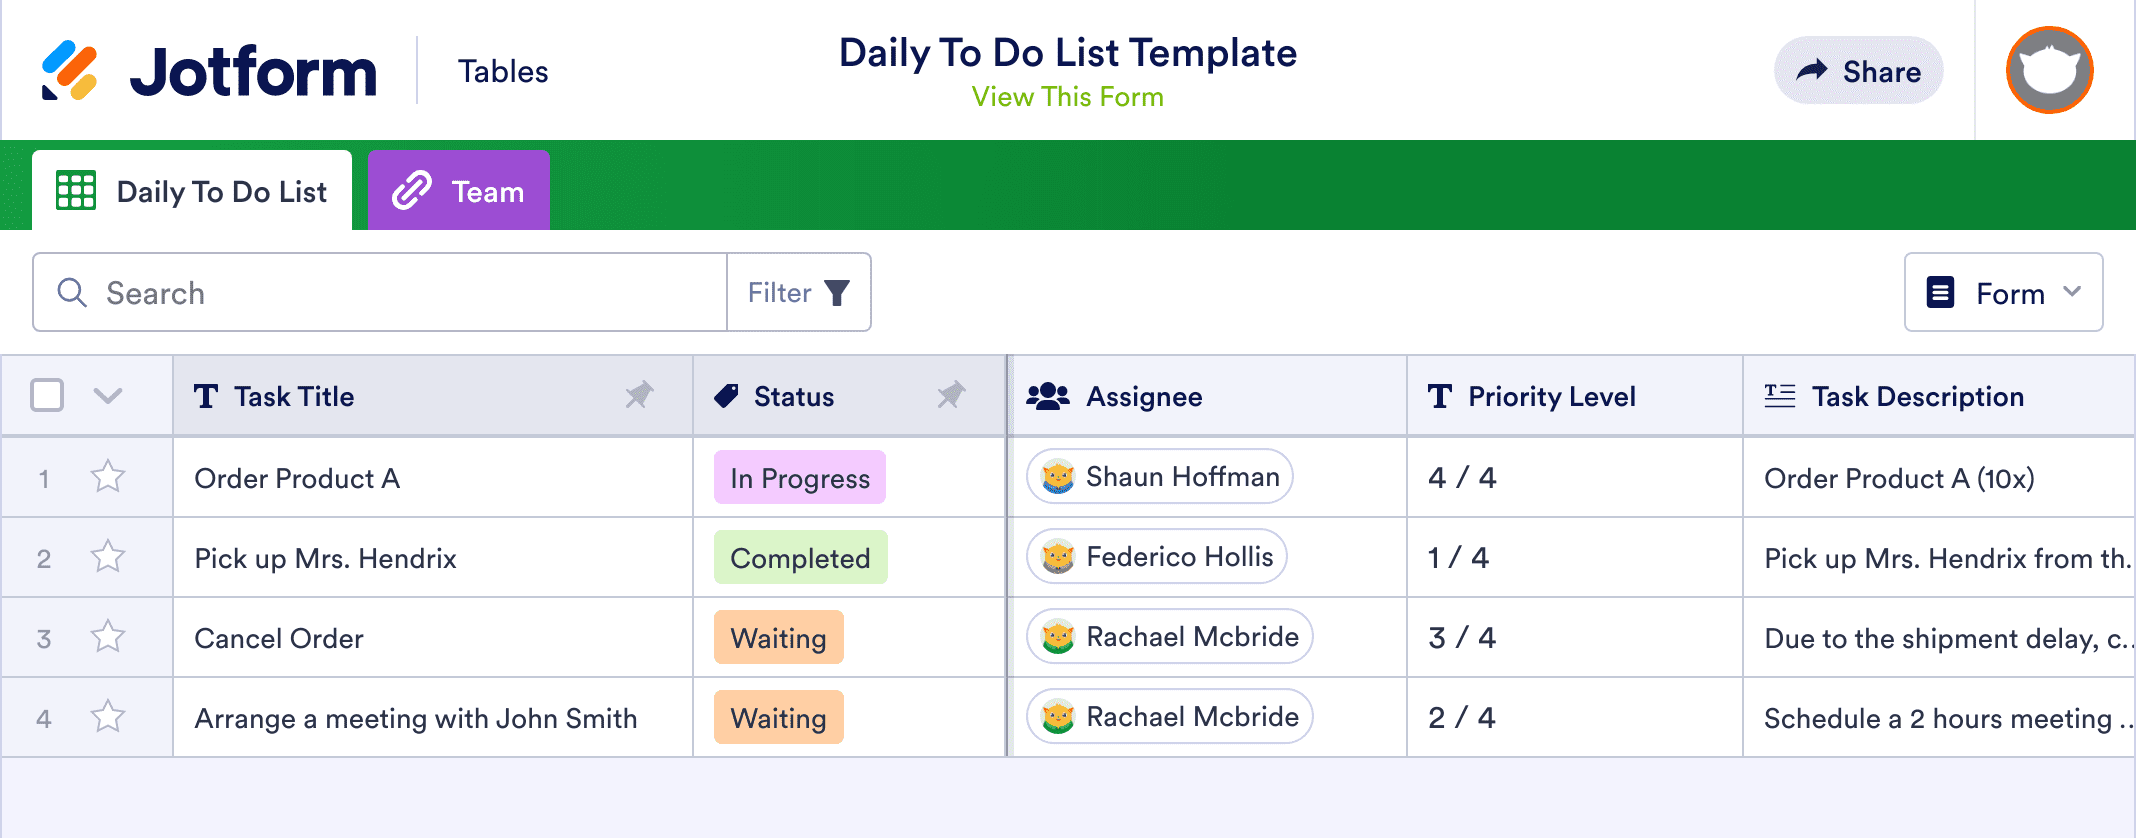 Daily To Do List Template